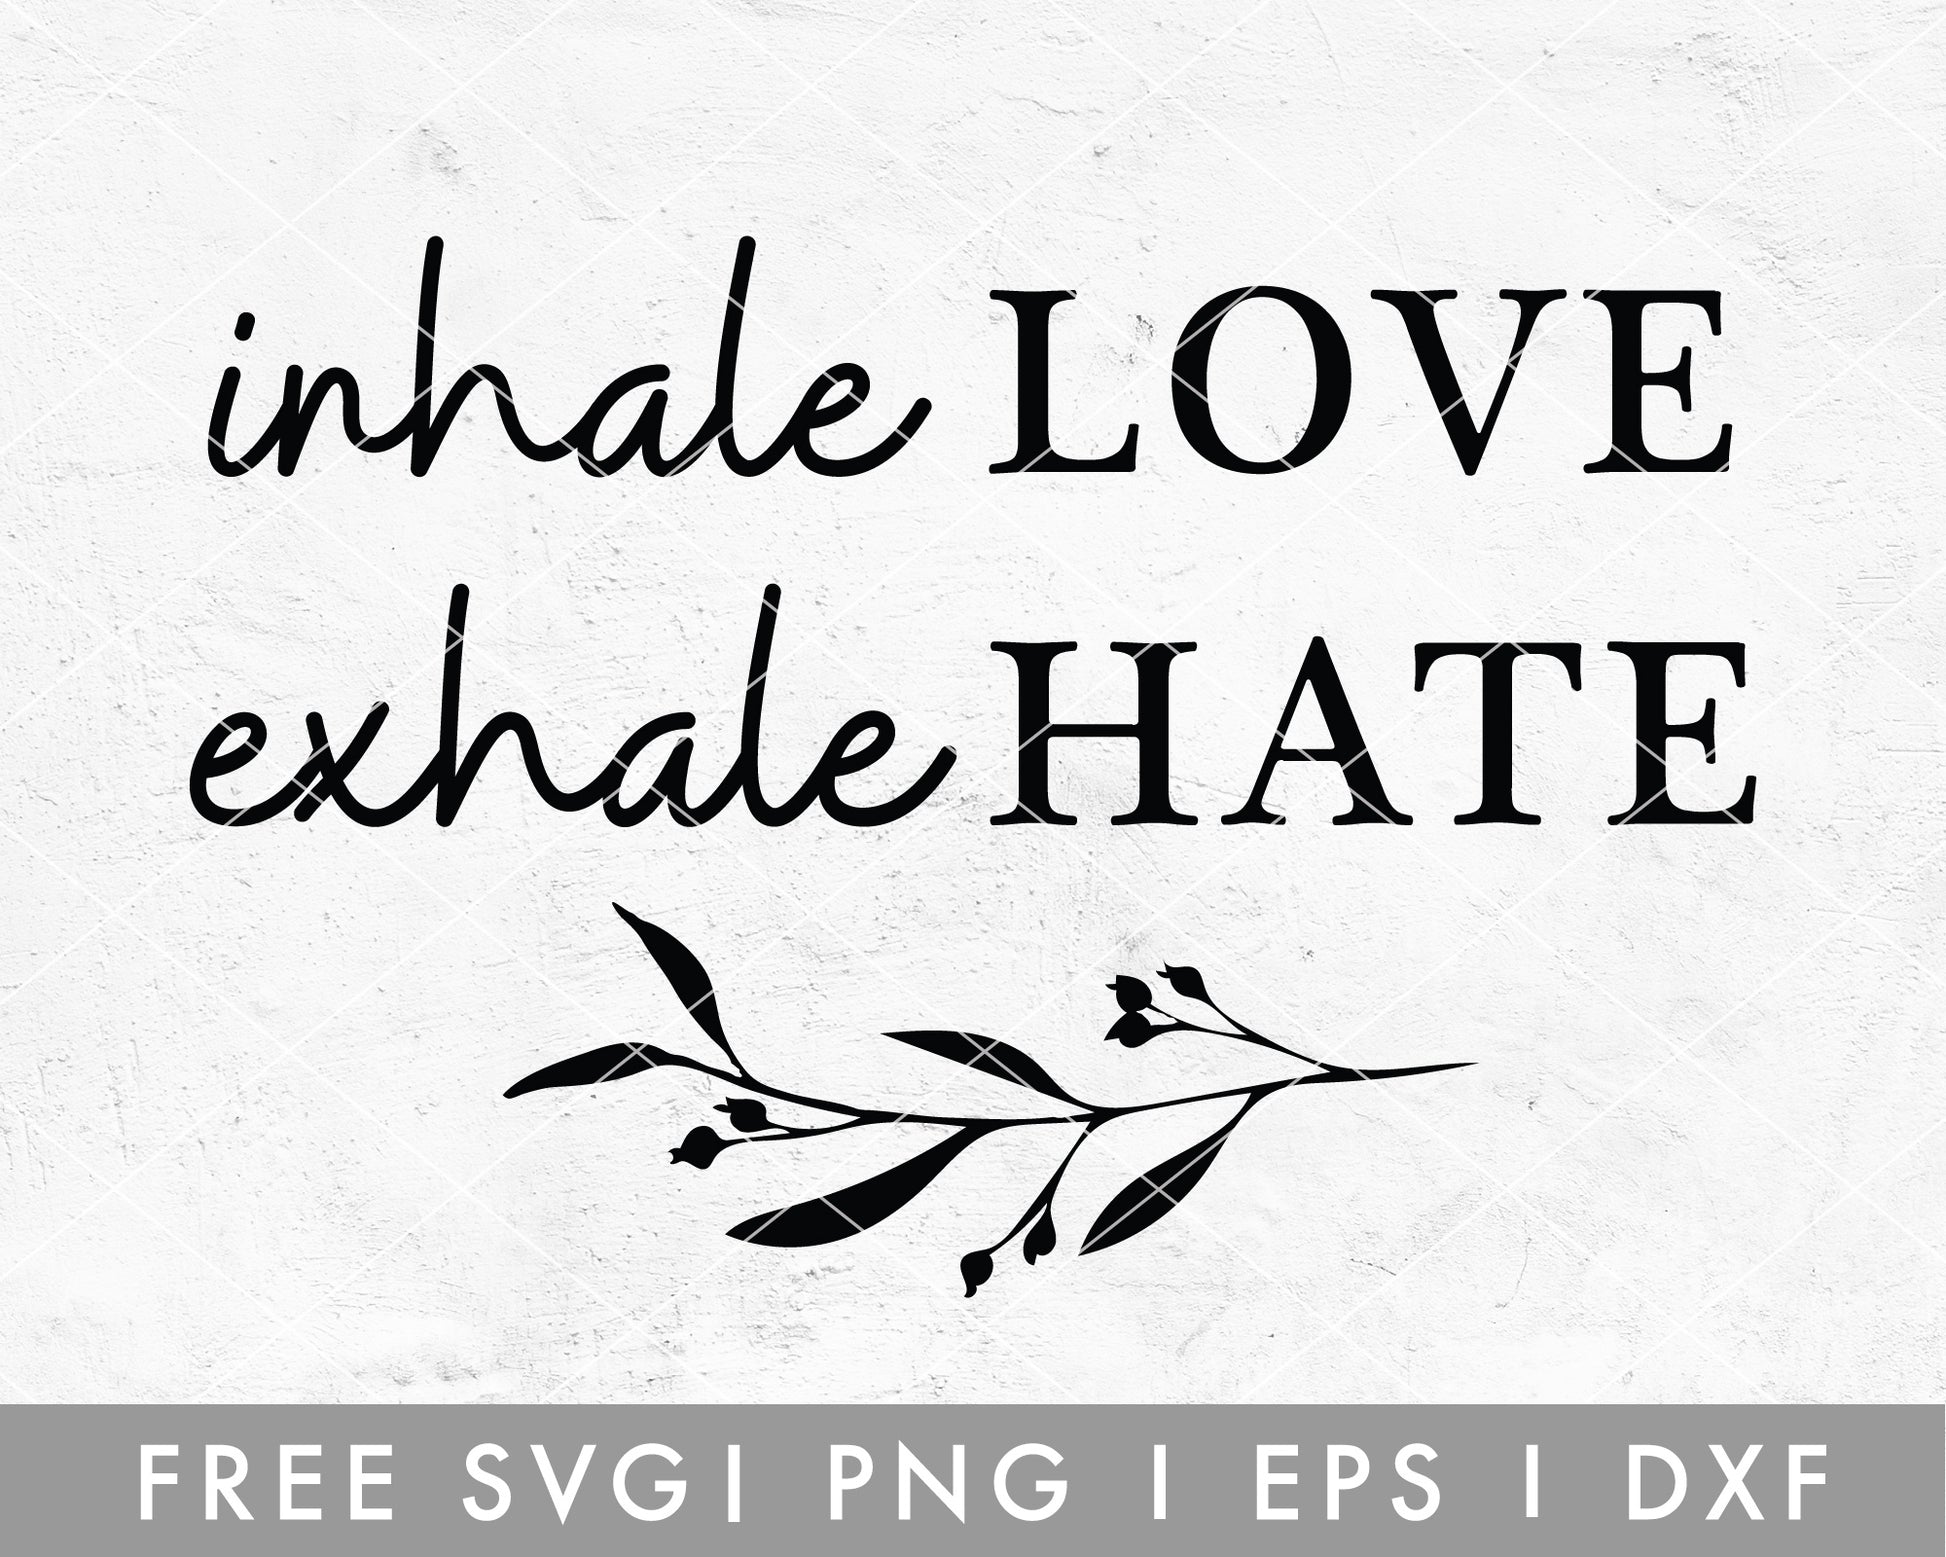 FREE Inhale Love Exhale Hate SVG Cut File for Cricut, Cameo Silhouette | Free SVG Cut File